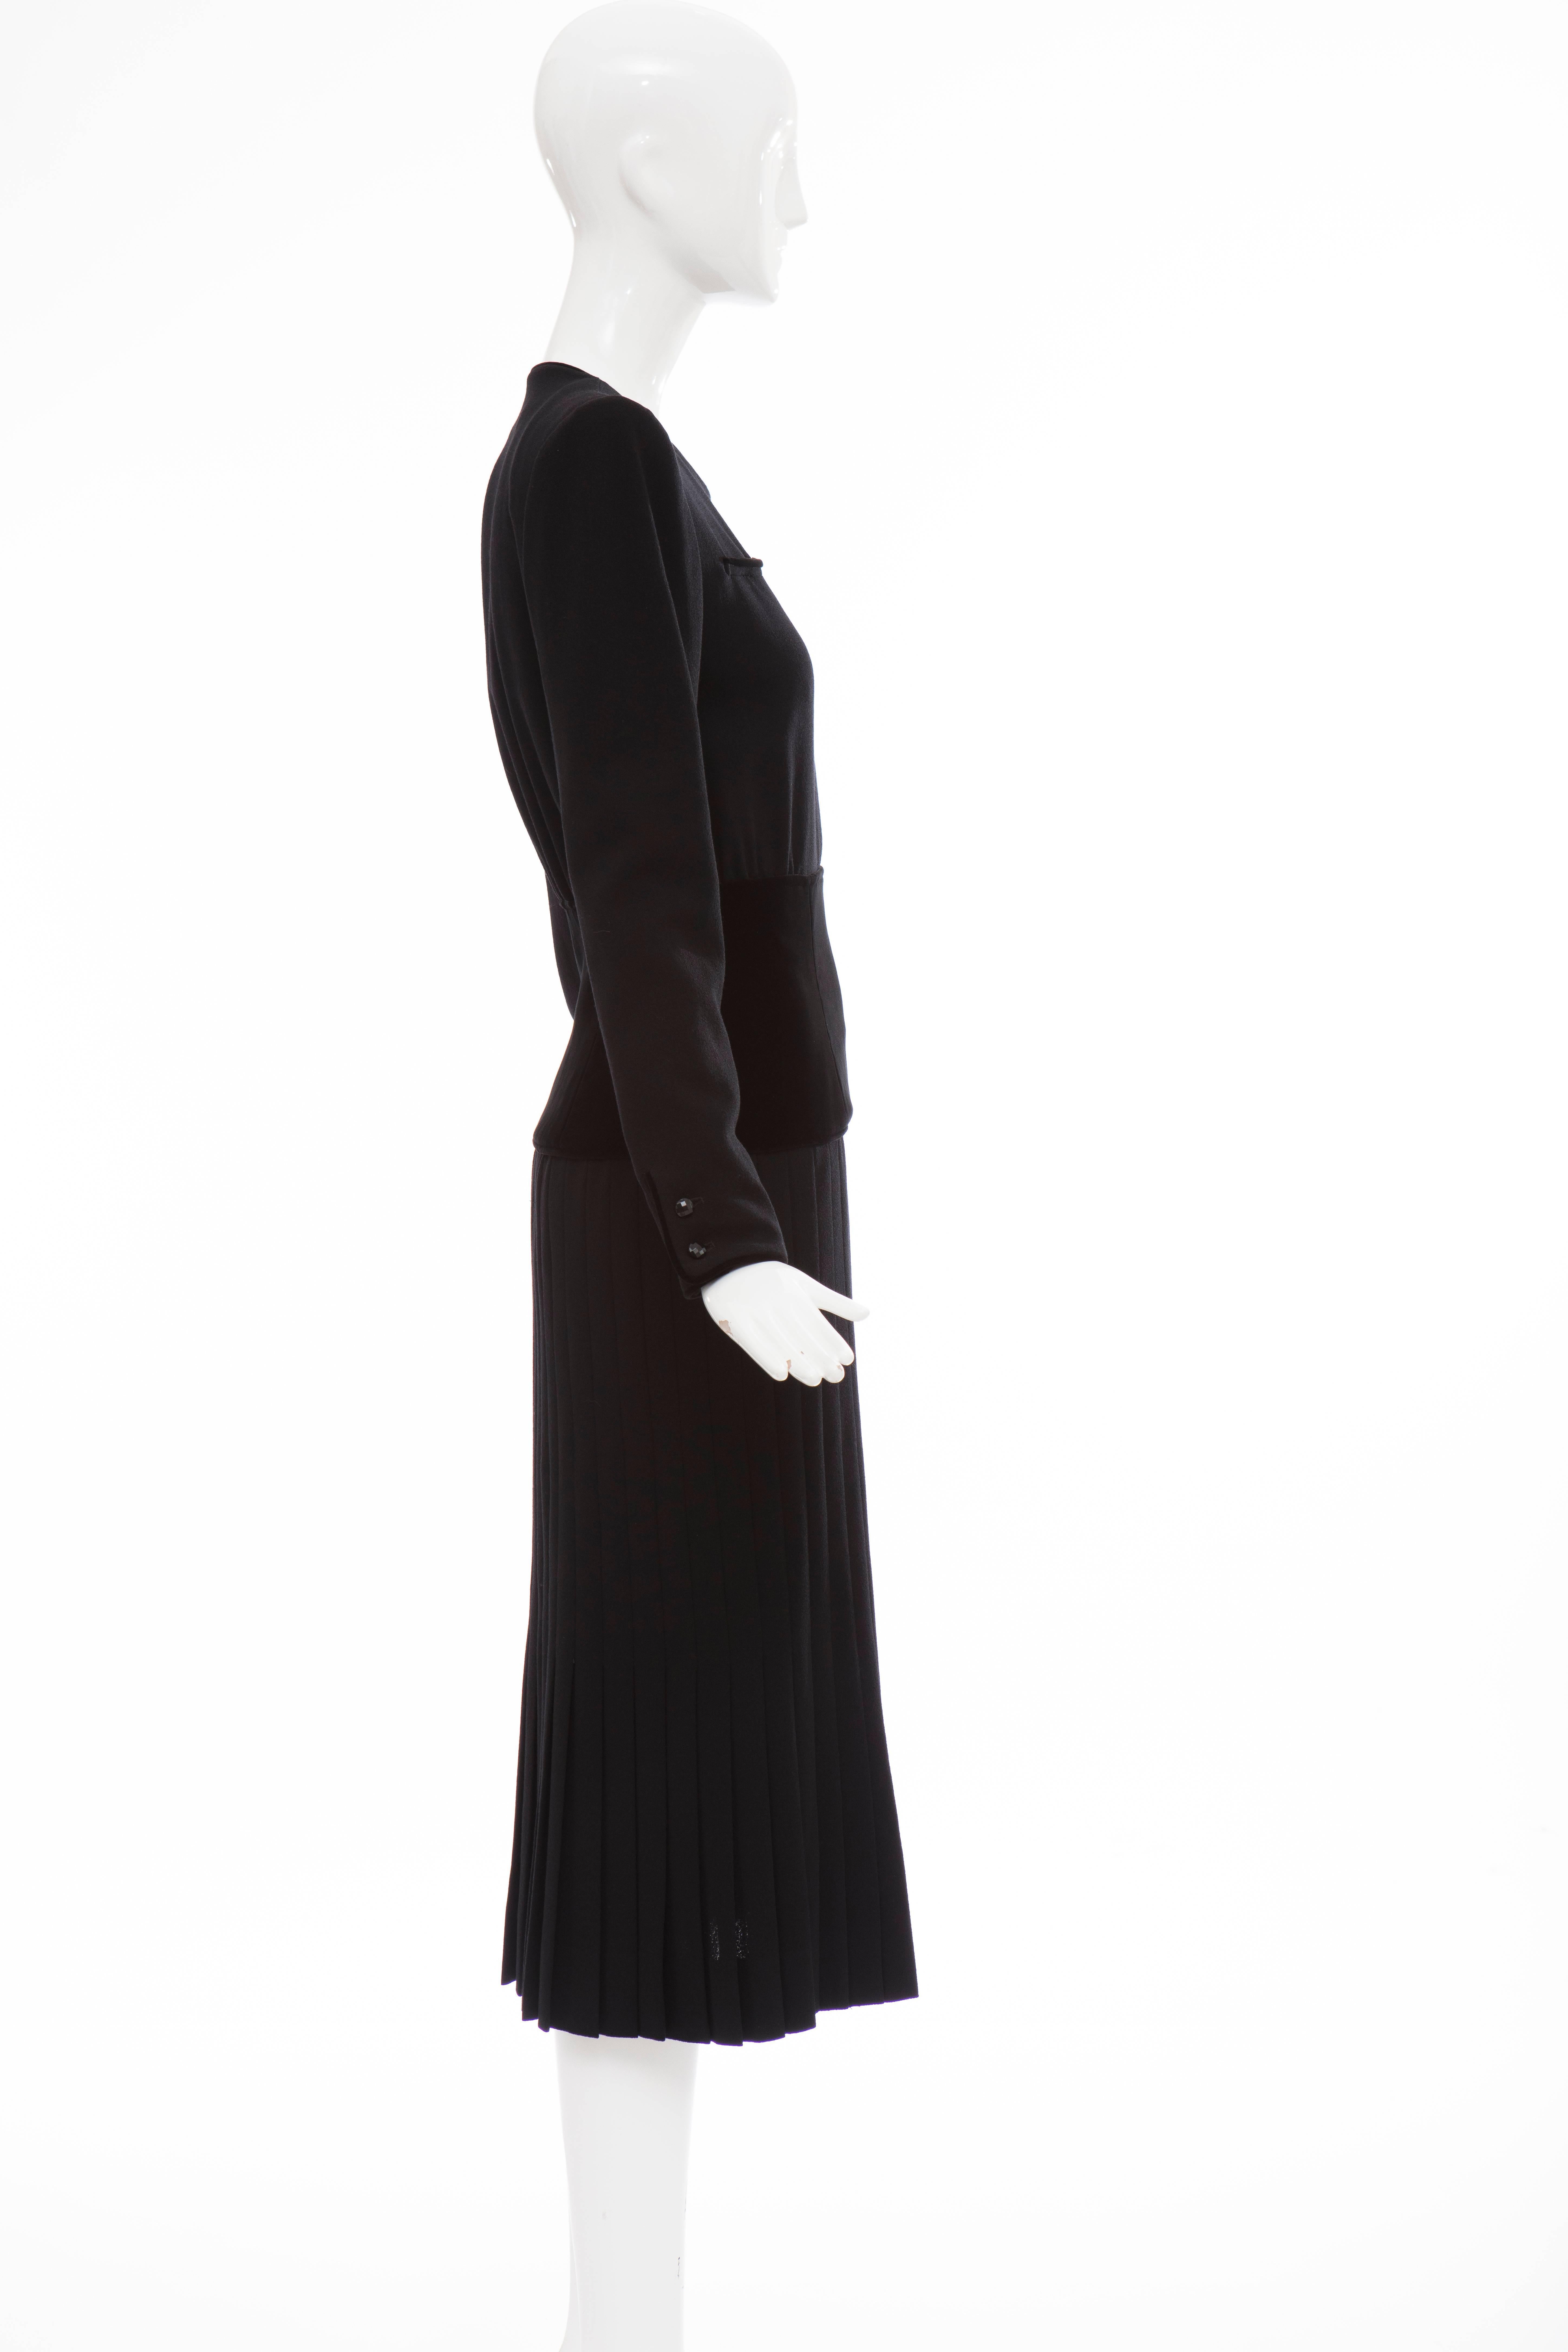 Valentino Black Wool Crepe And Velvet Evening Dress, Circa 1980's For Sale 2